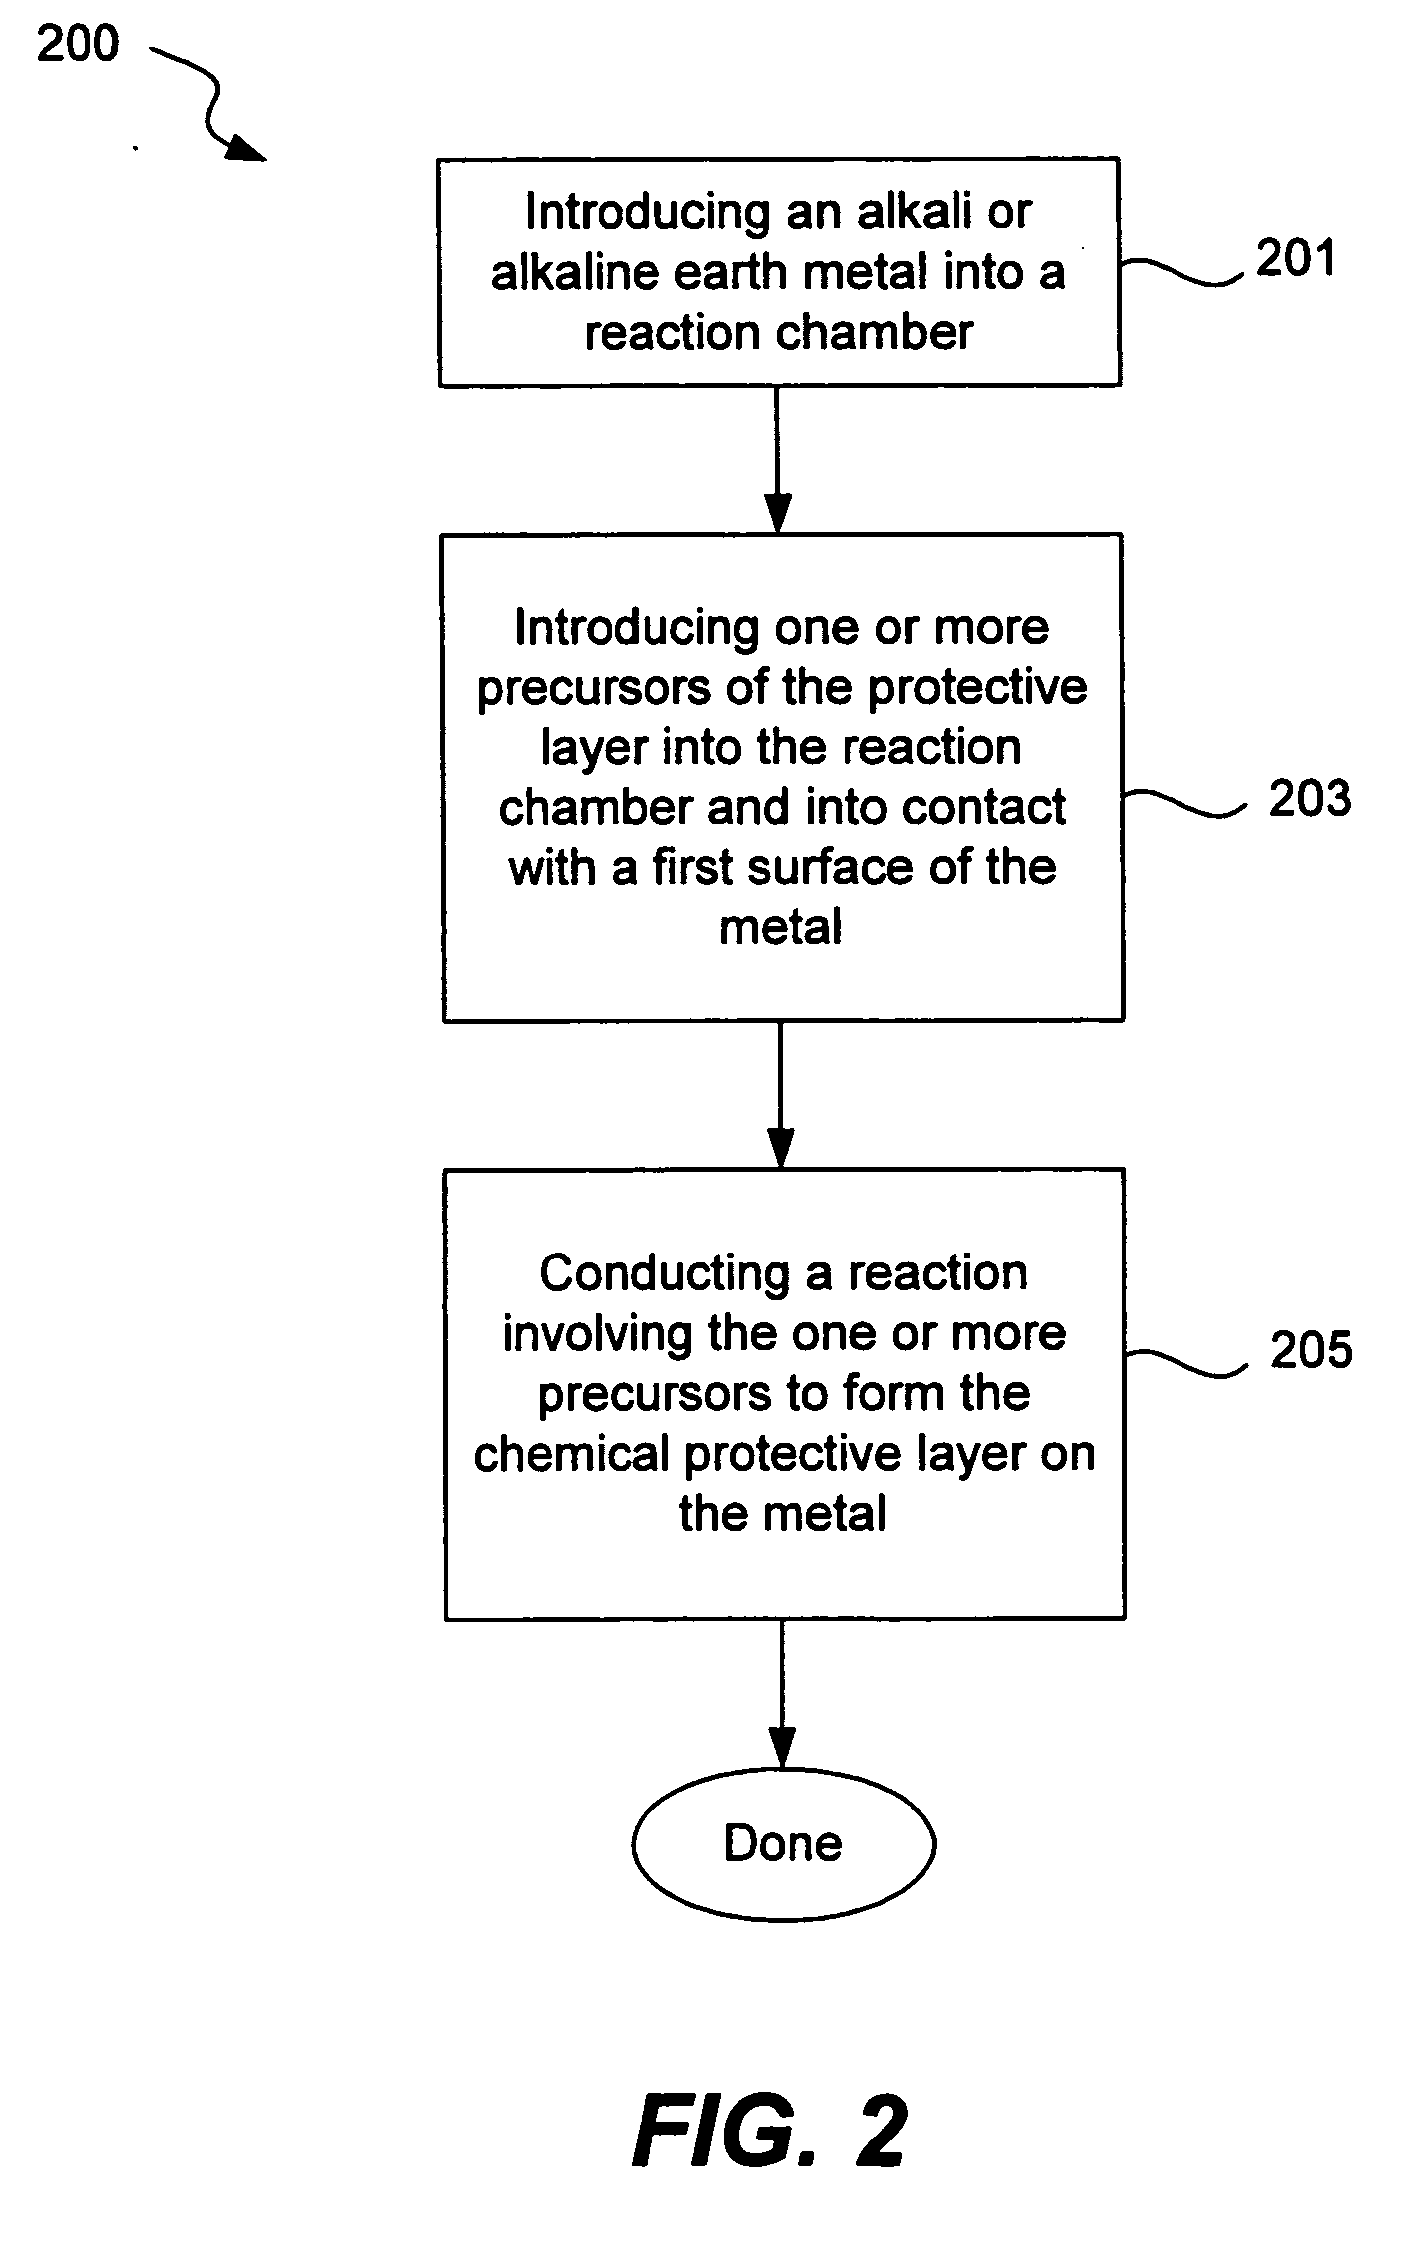 Chemical protection of a lithium surface